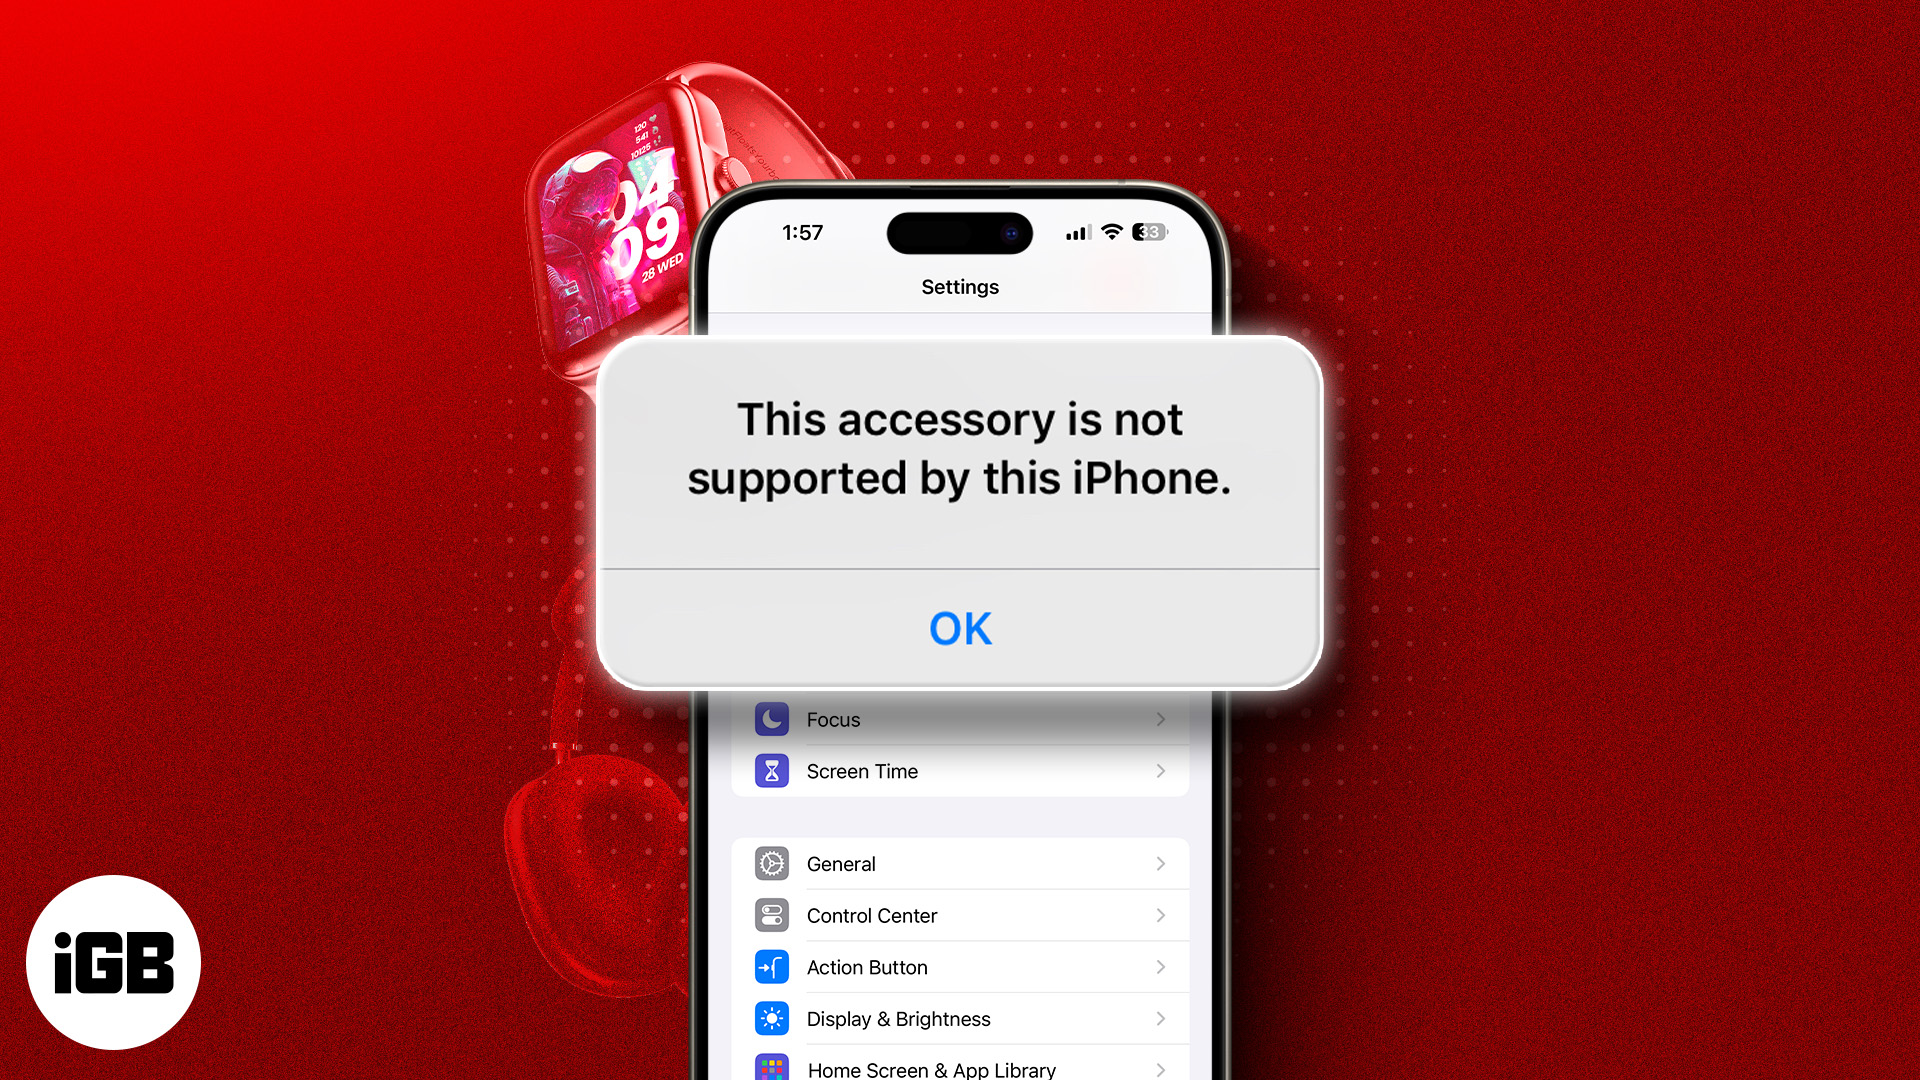 How to fix This accessory may not be supported on iPhone